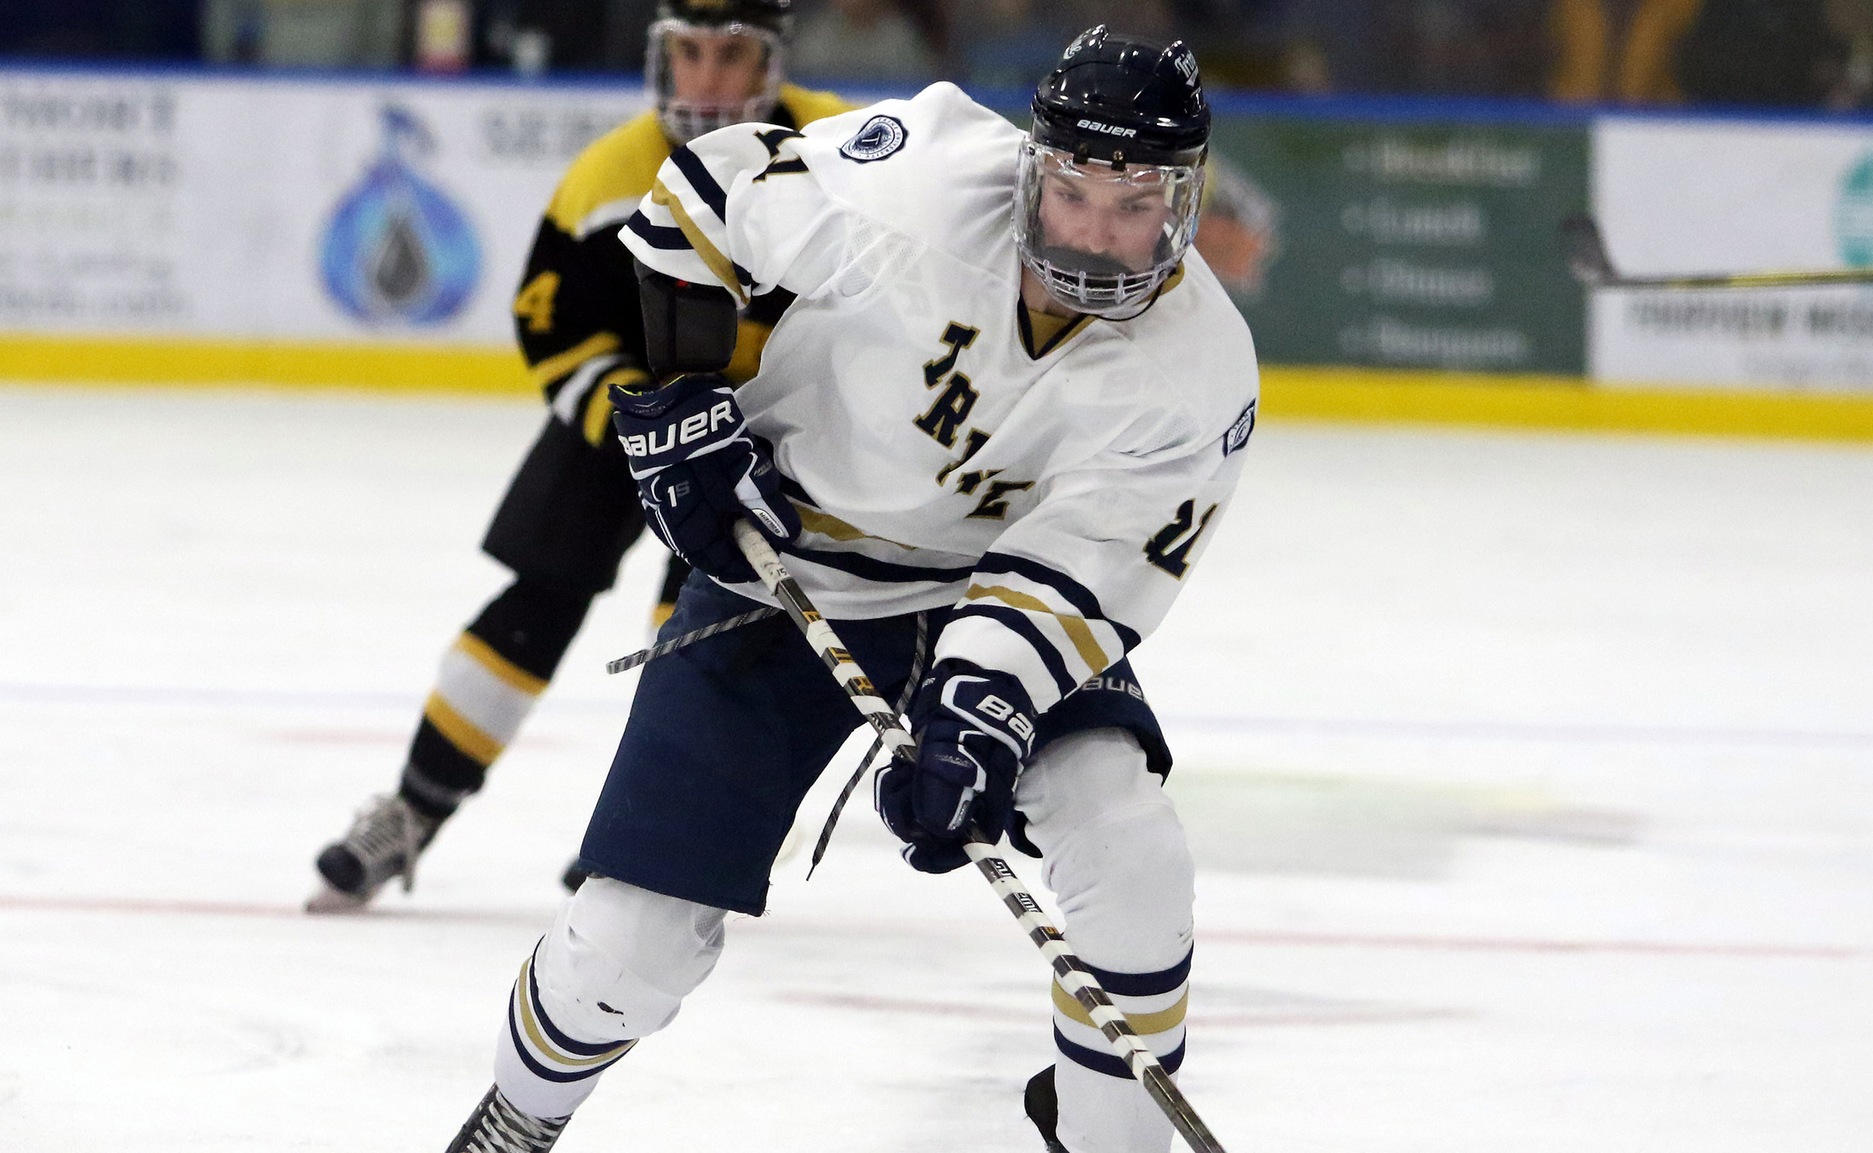 ACHA D3 Finish in Stalemate with Xavier